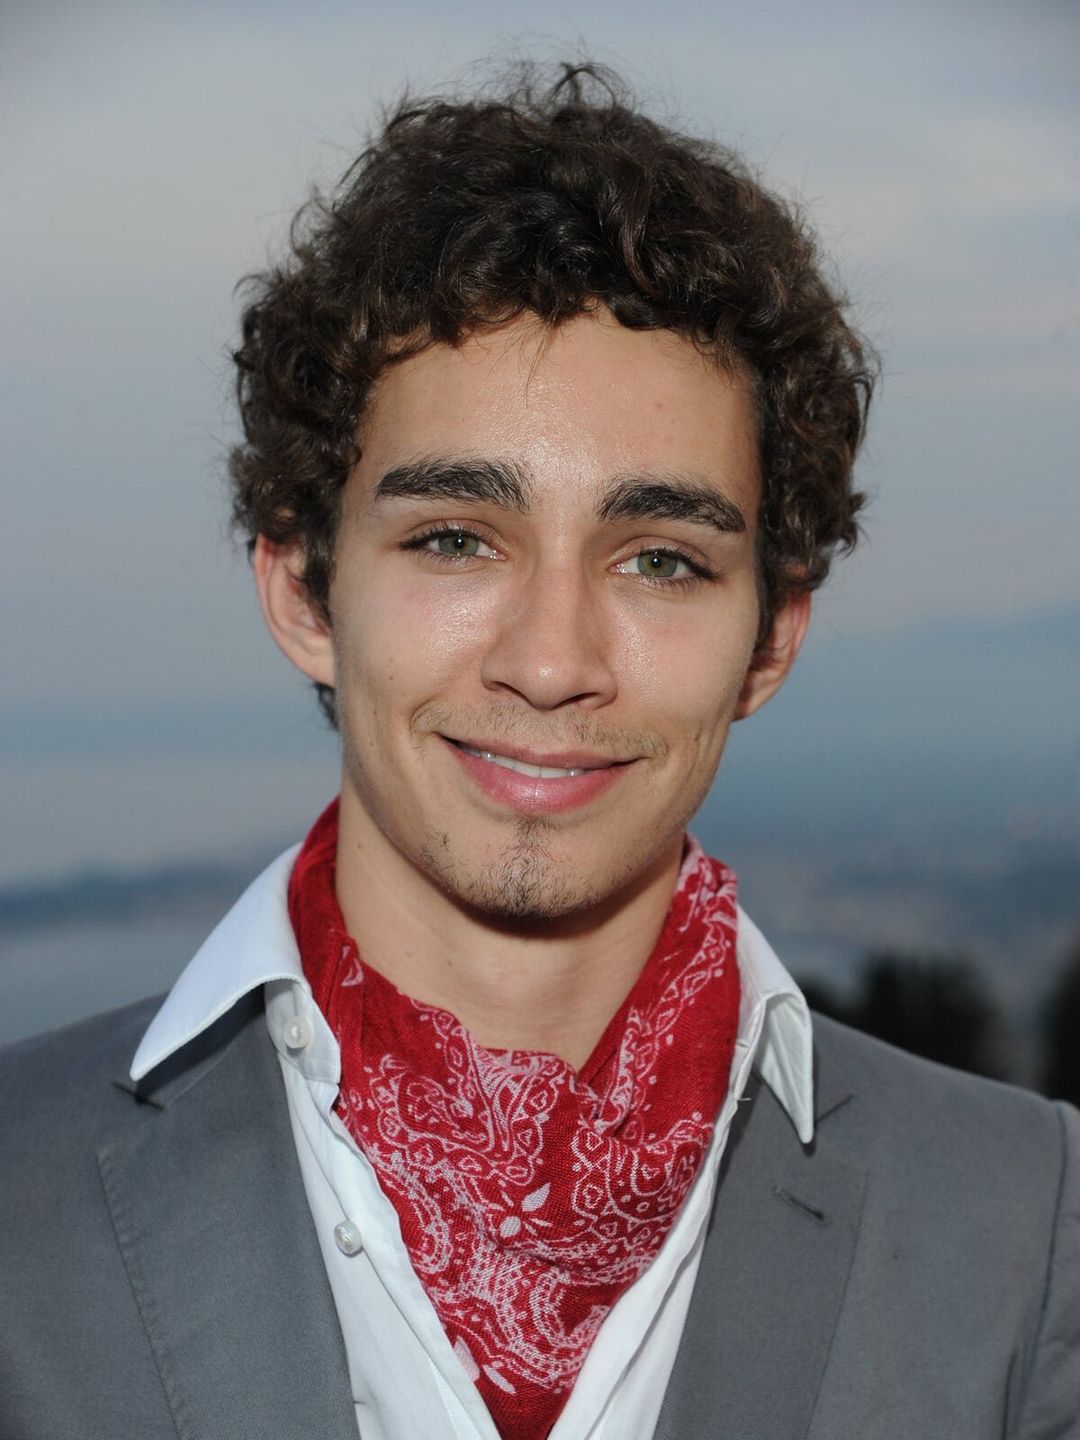 Robert Sheehan how did he became famous